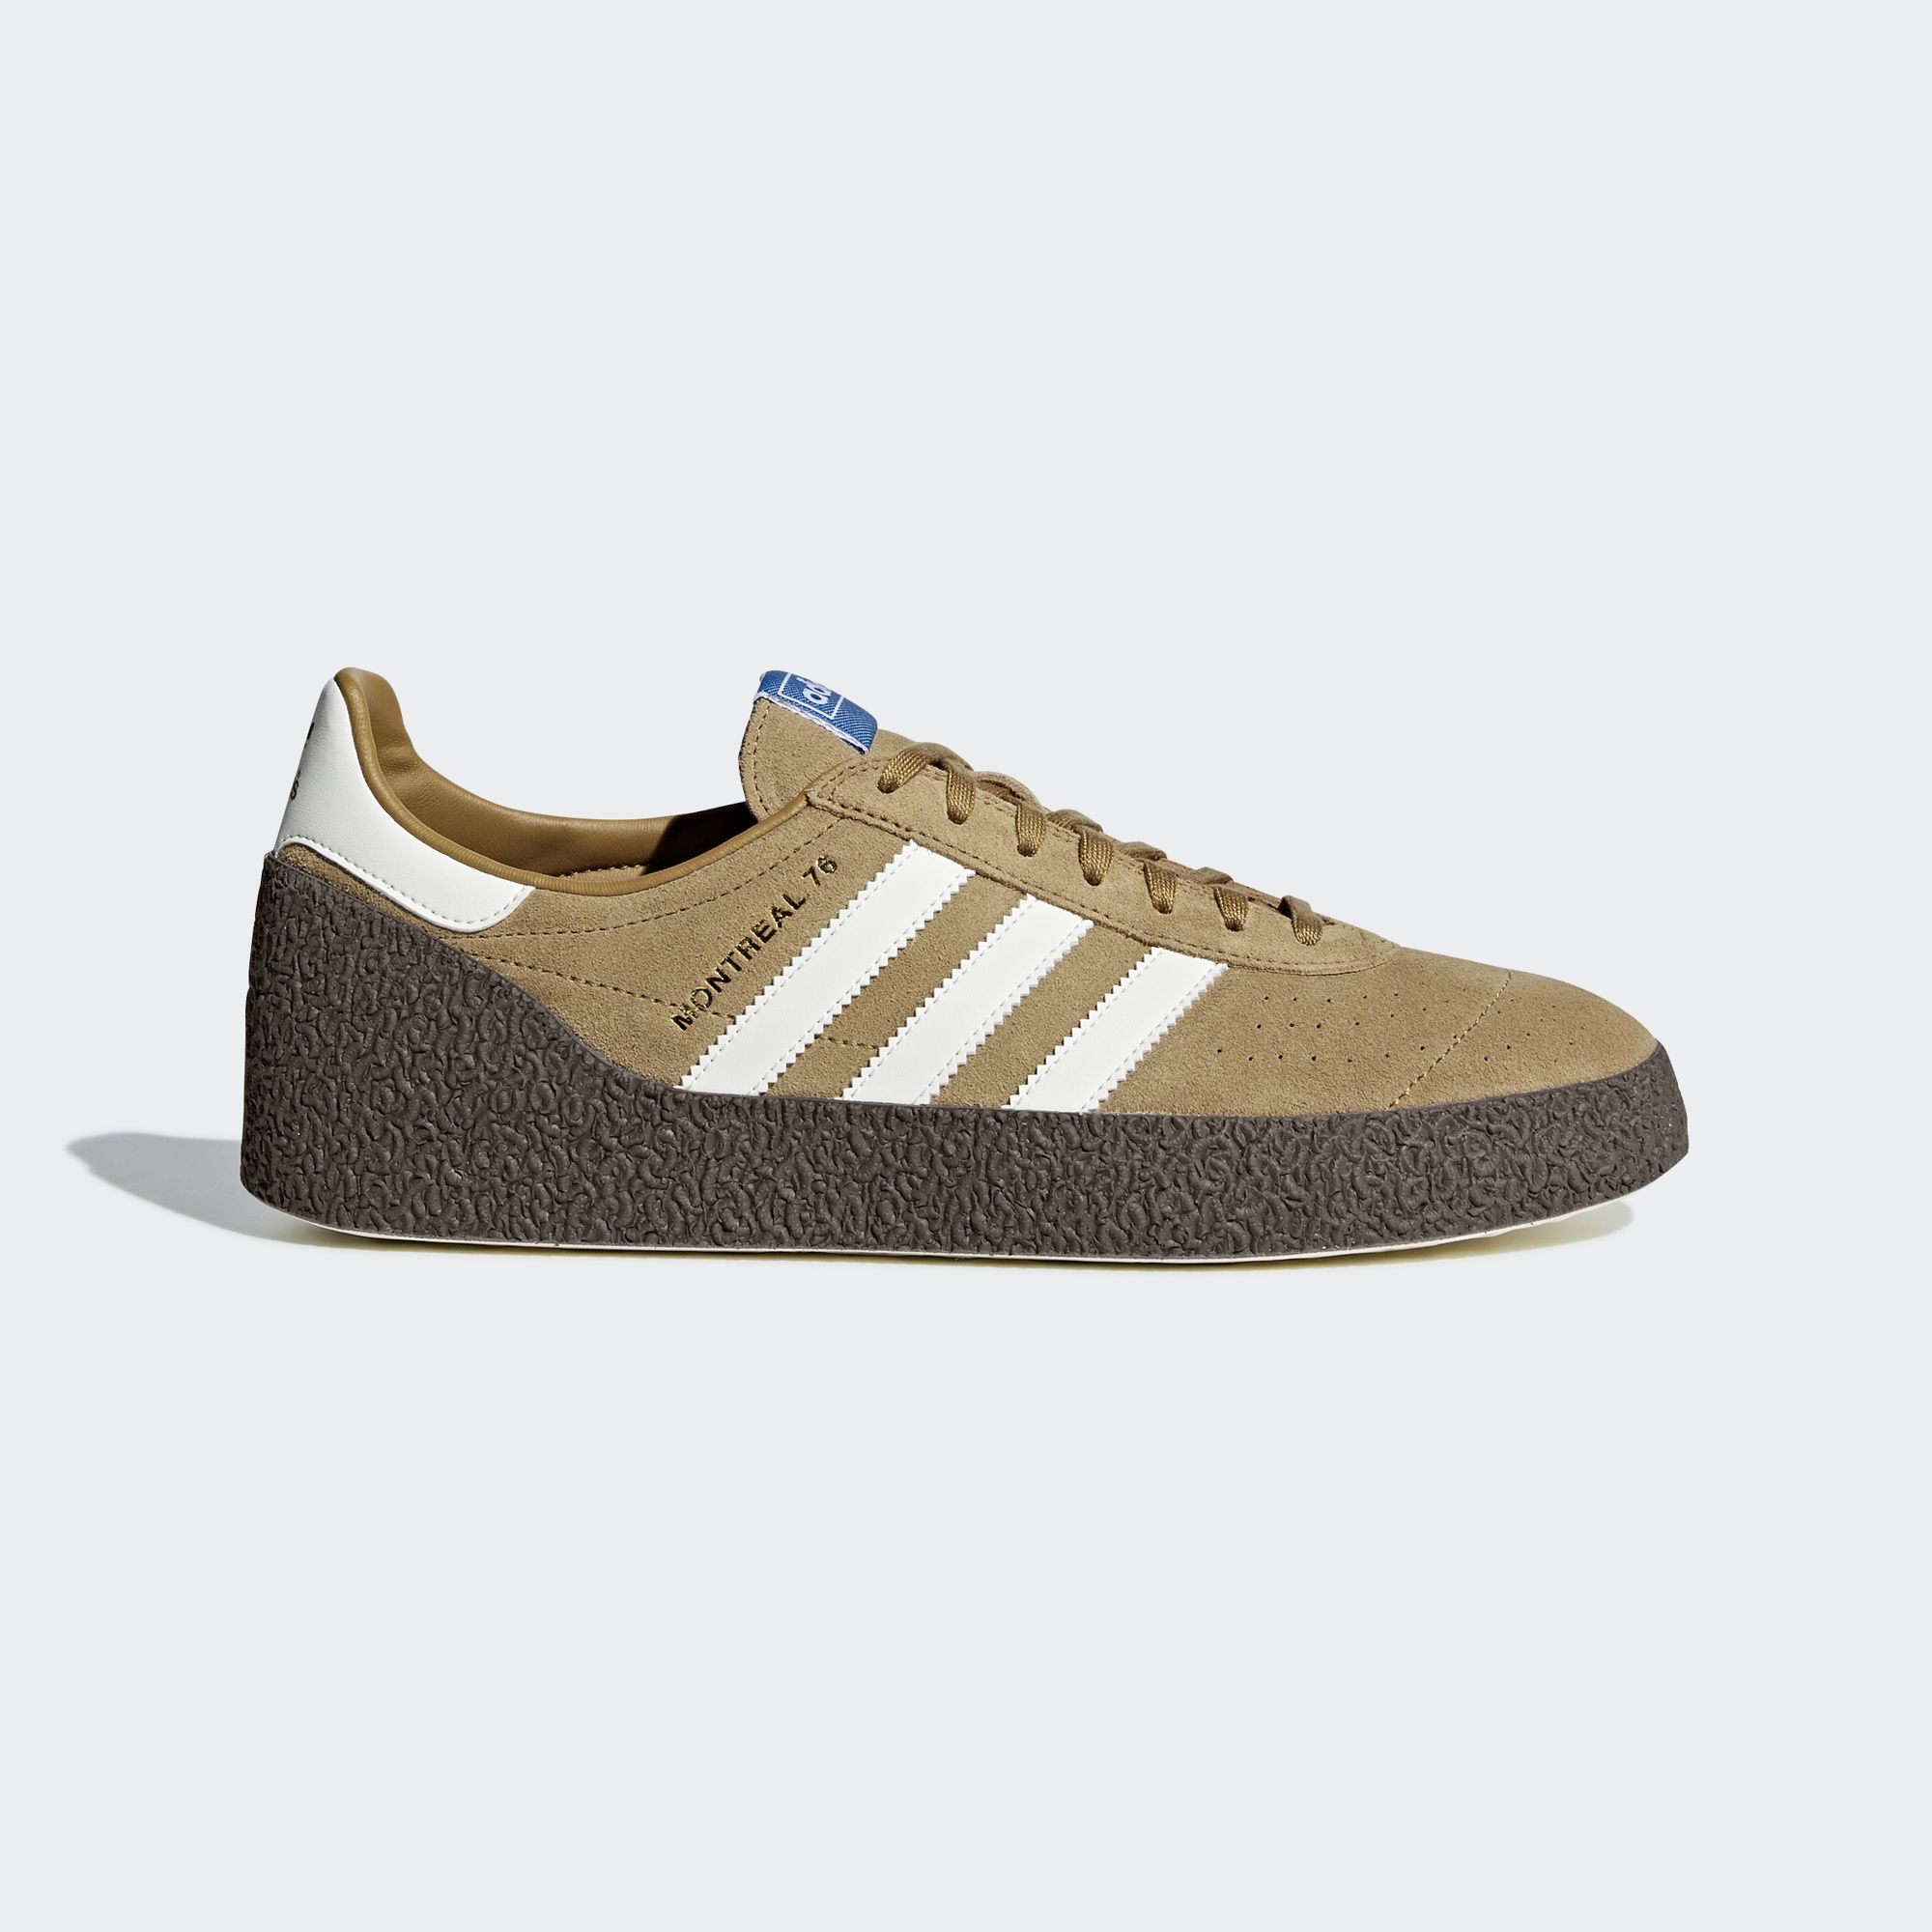 The adidas Shoe of the 1976 Montreal Summer Making a Comeback - WearTesters